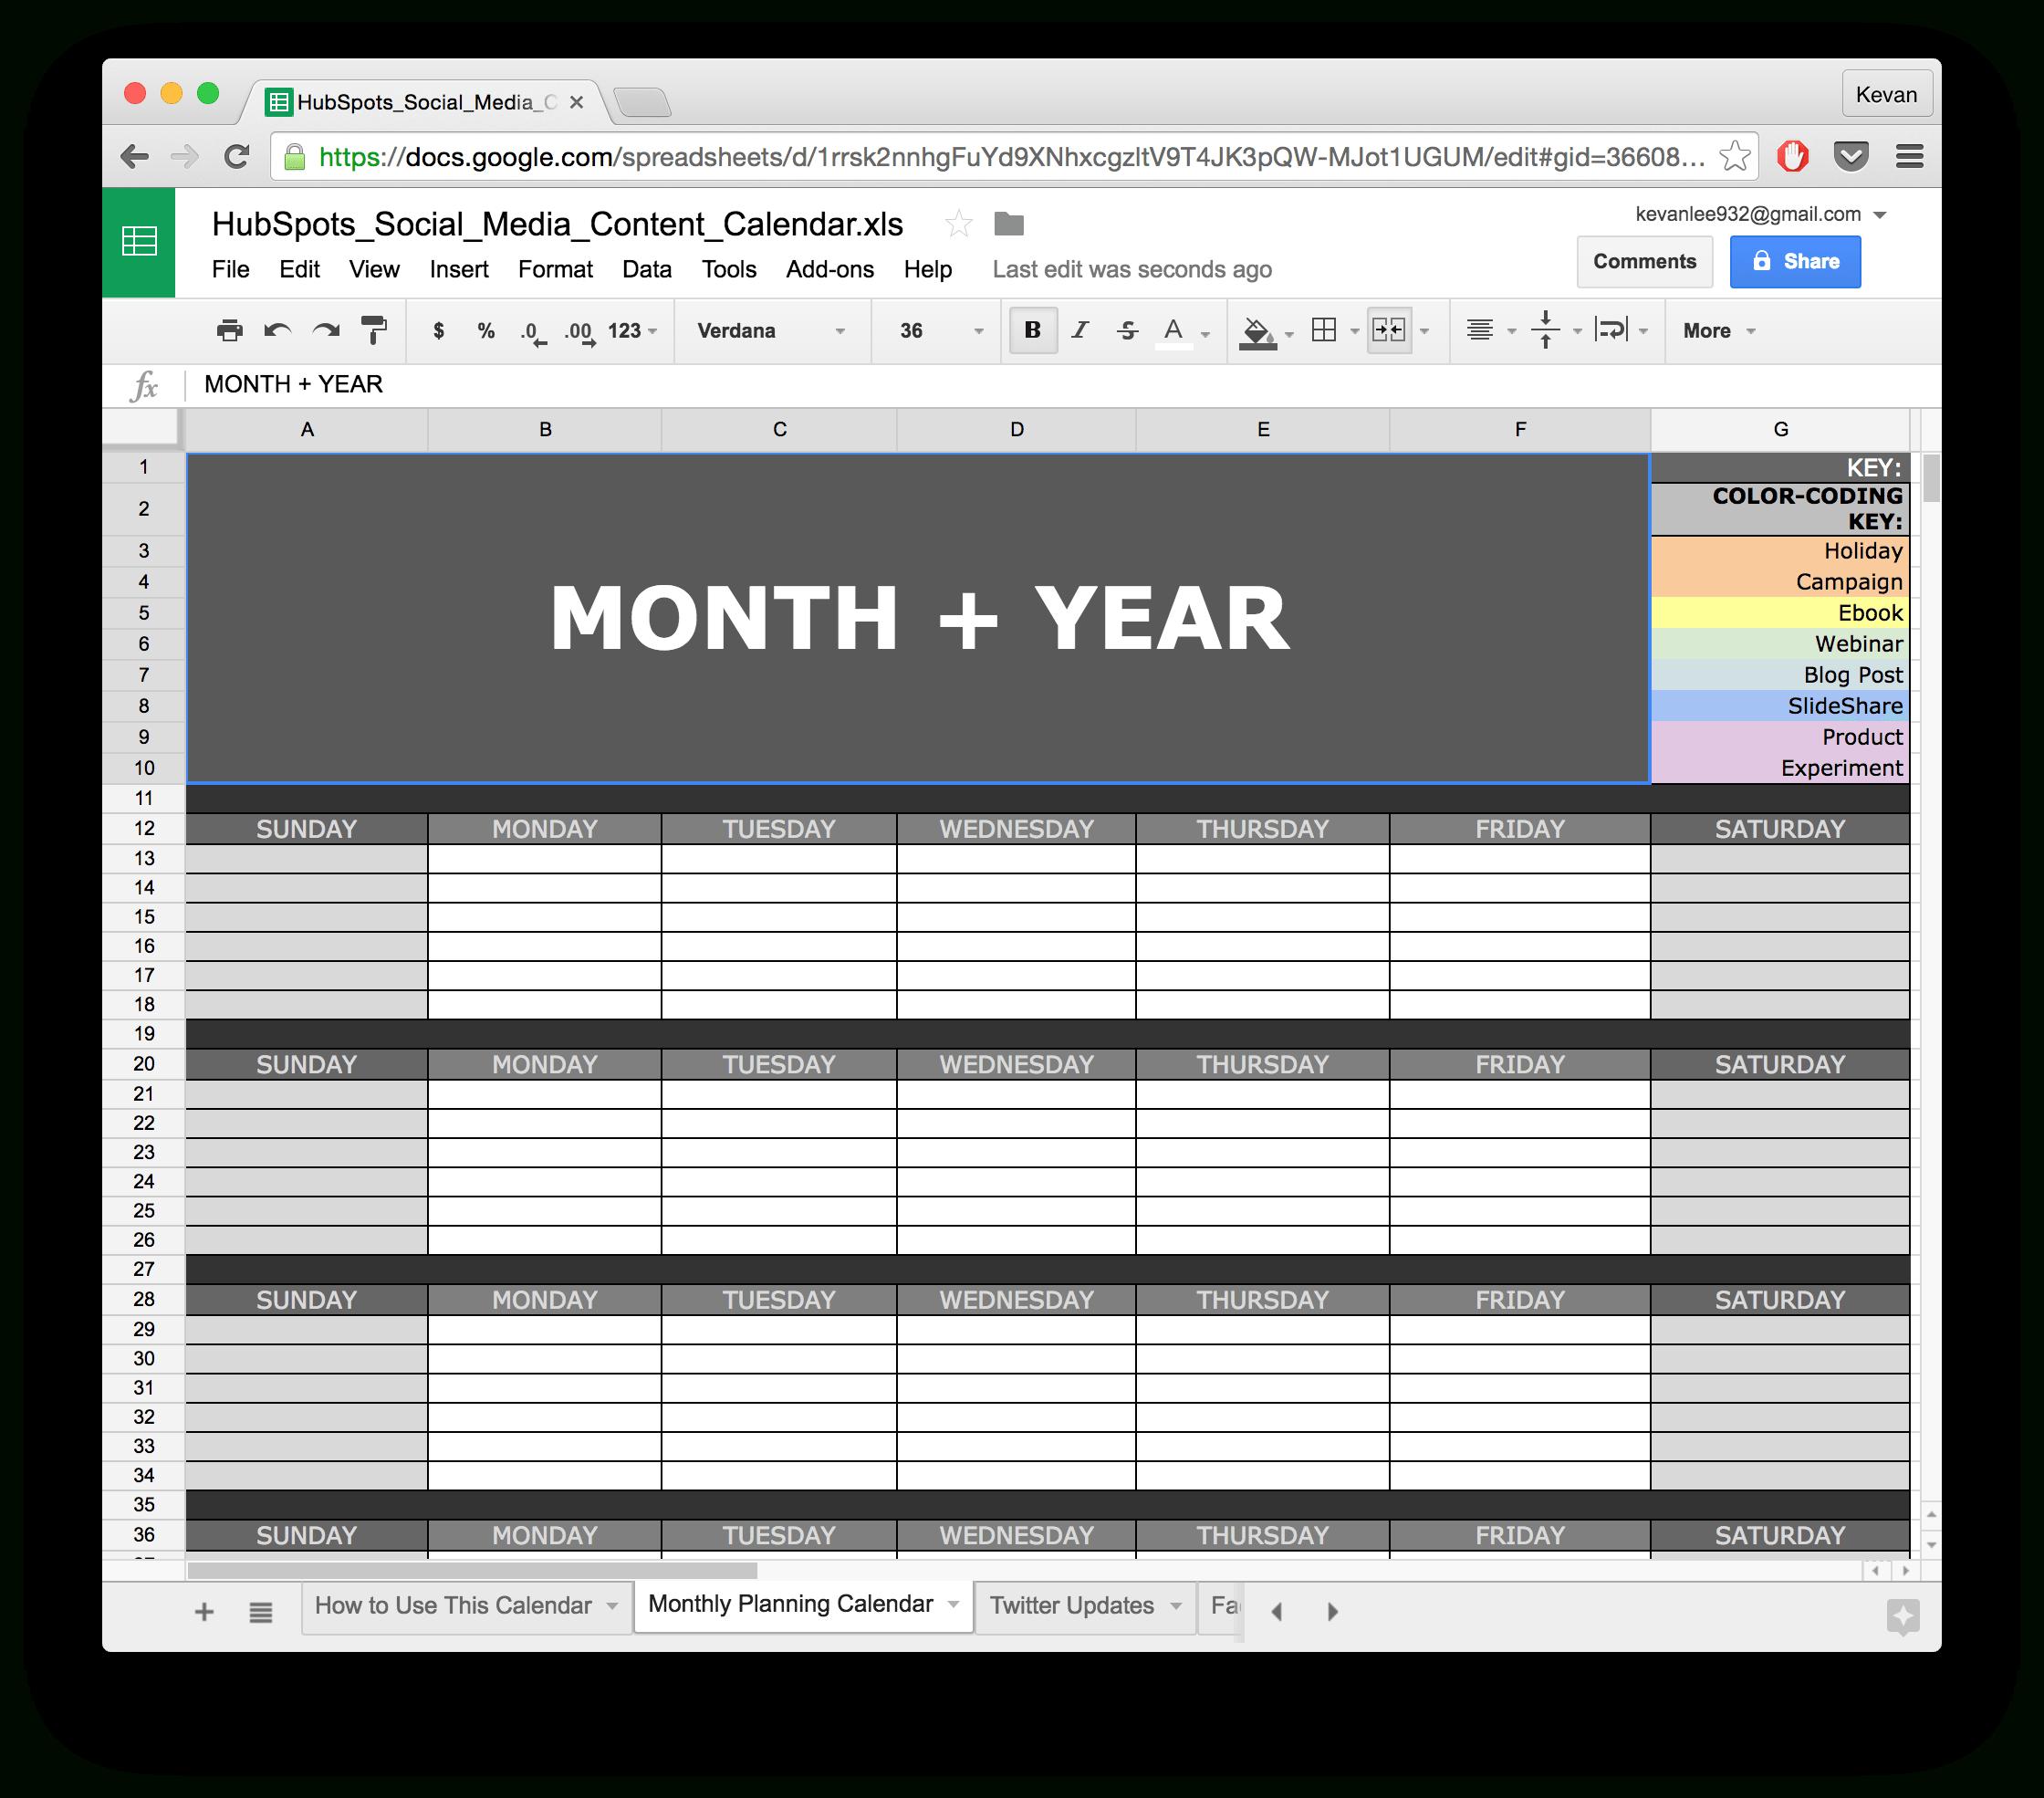 Schedule Spreadsheet Google inside 10 Readytogo Marketing Spreadsheets To Boost Your Productivity Today